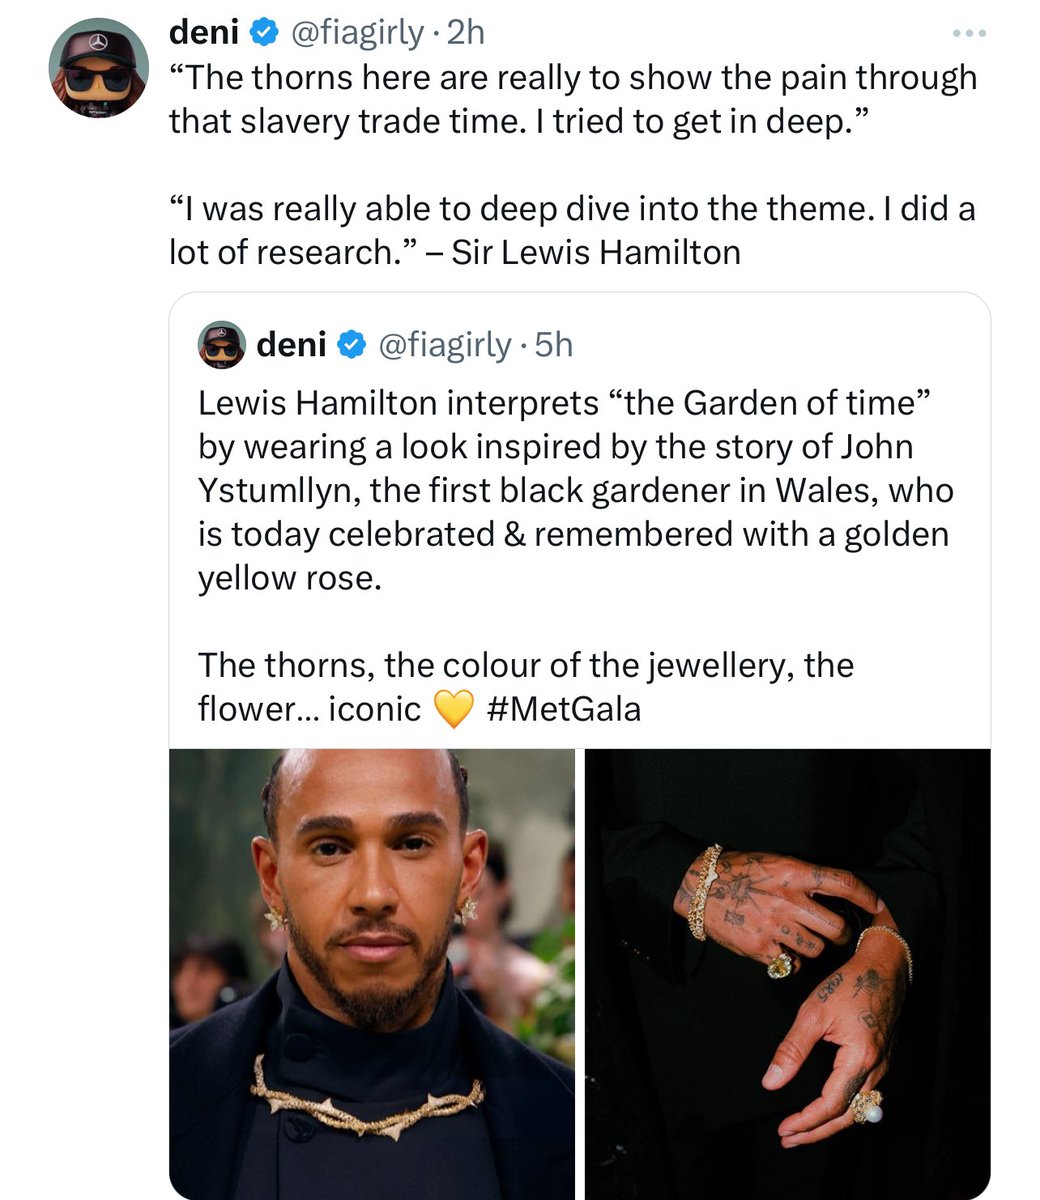 This is why Sir Lewis Hamilton is the greatest of all time.